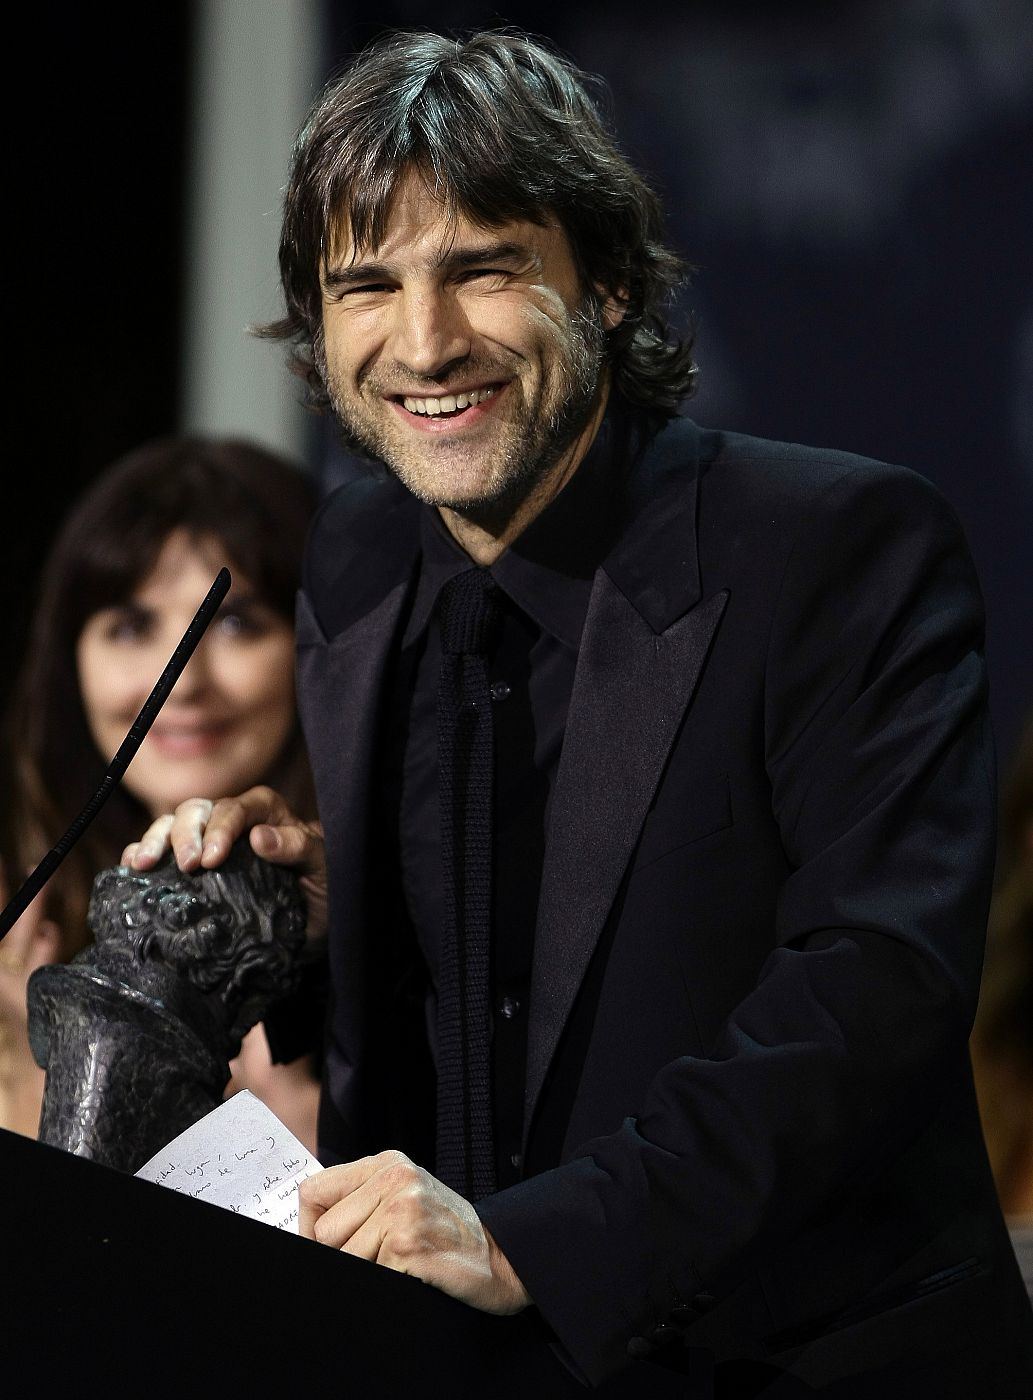 Actor Alberto San Juan smiles as he accepts his Best Actor award during the Spanish Film Academy "Goya" awards ceremony in Madrid